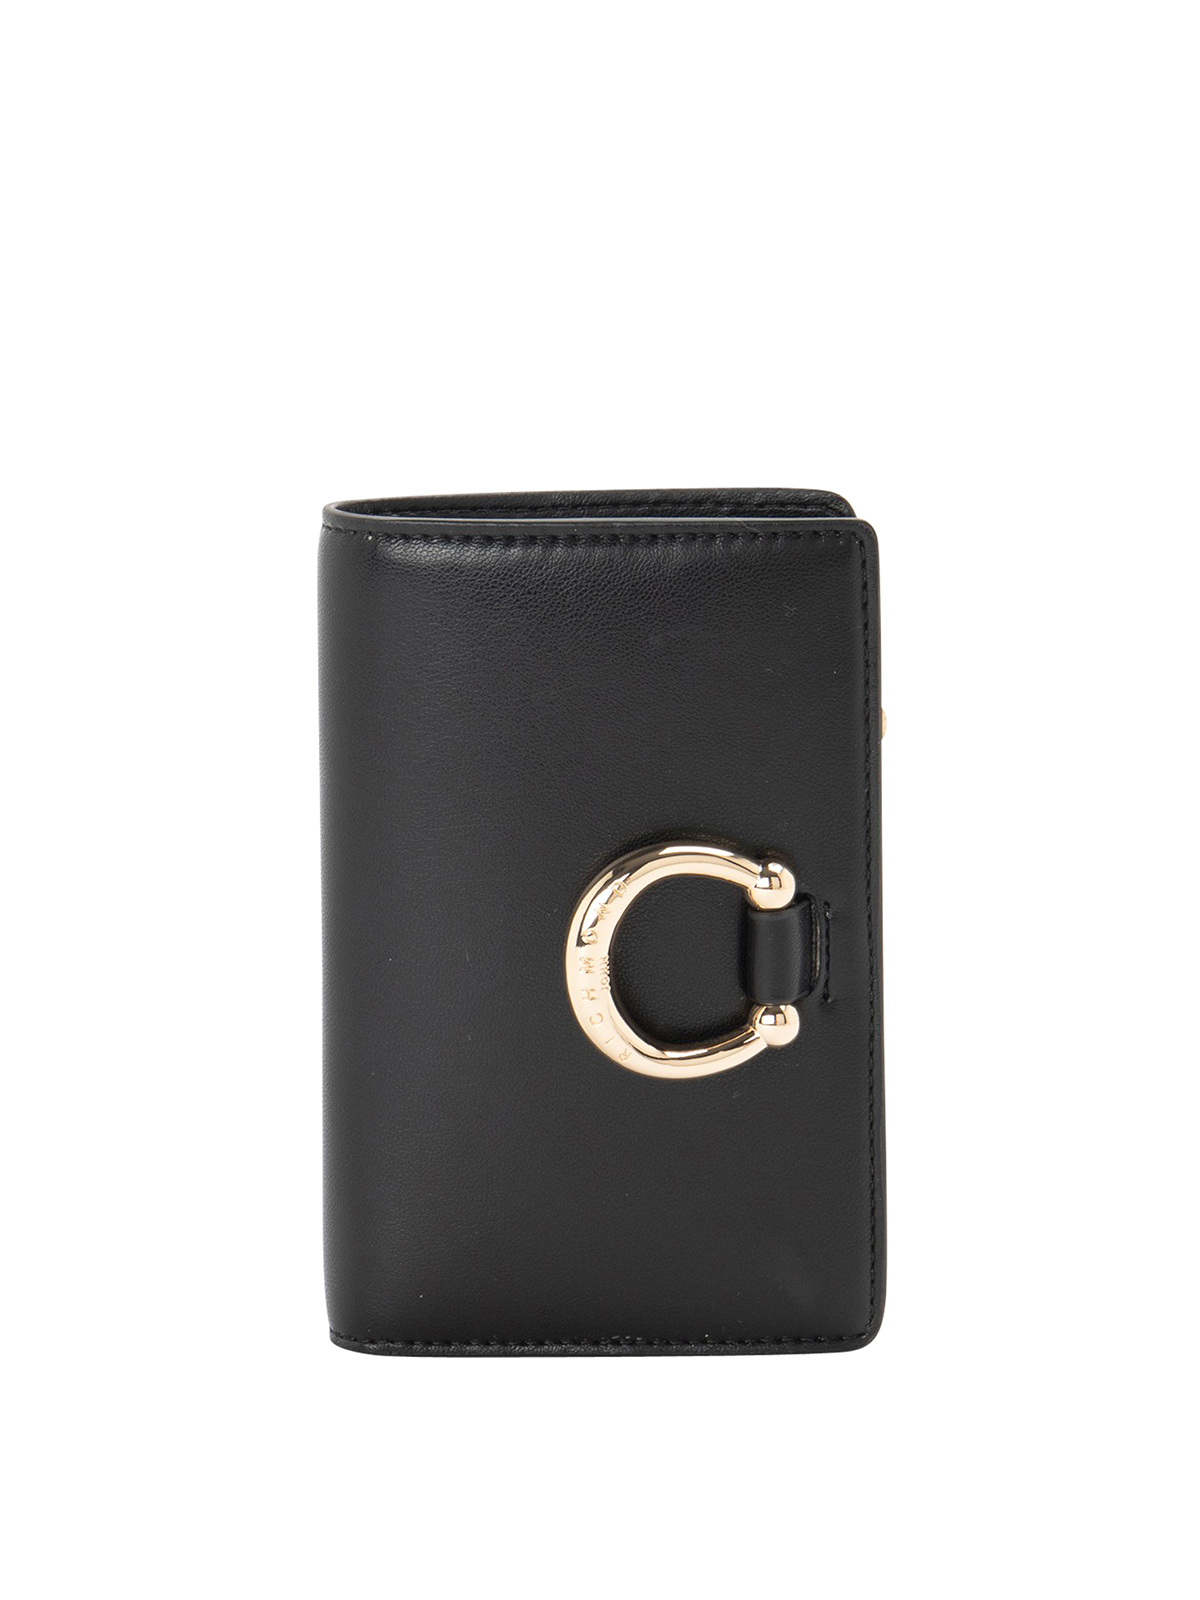 John Richmond Leather Wallet With Logo Hardware In Black